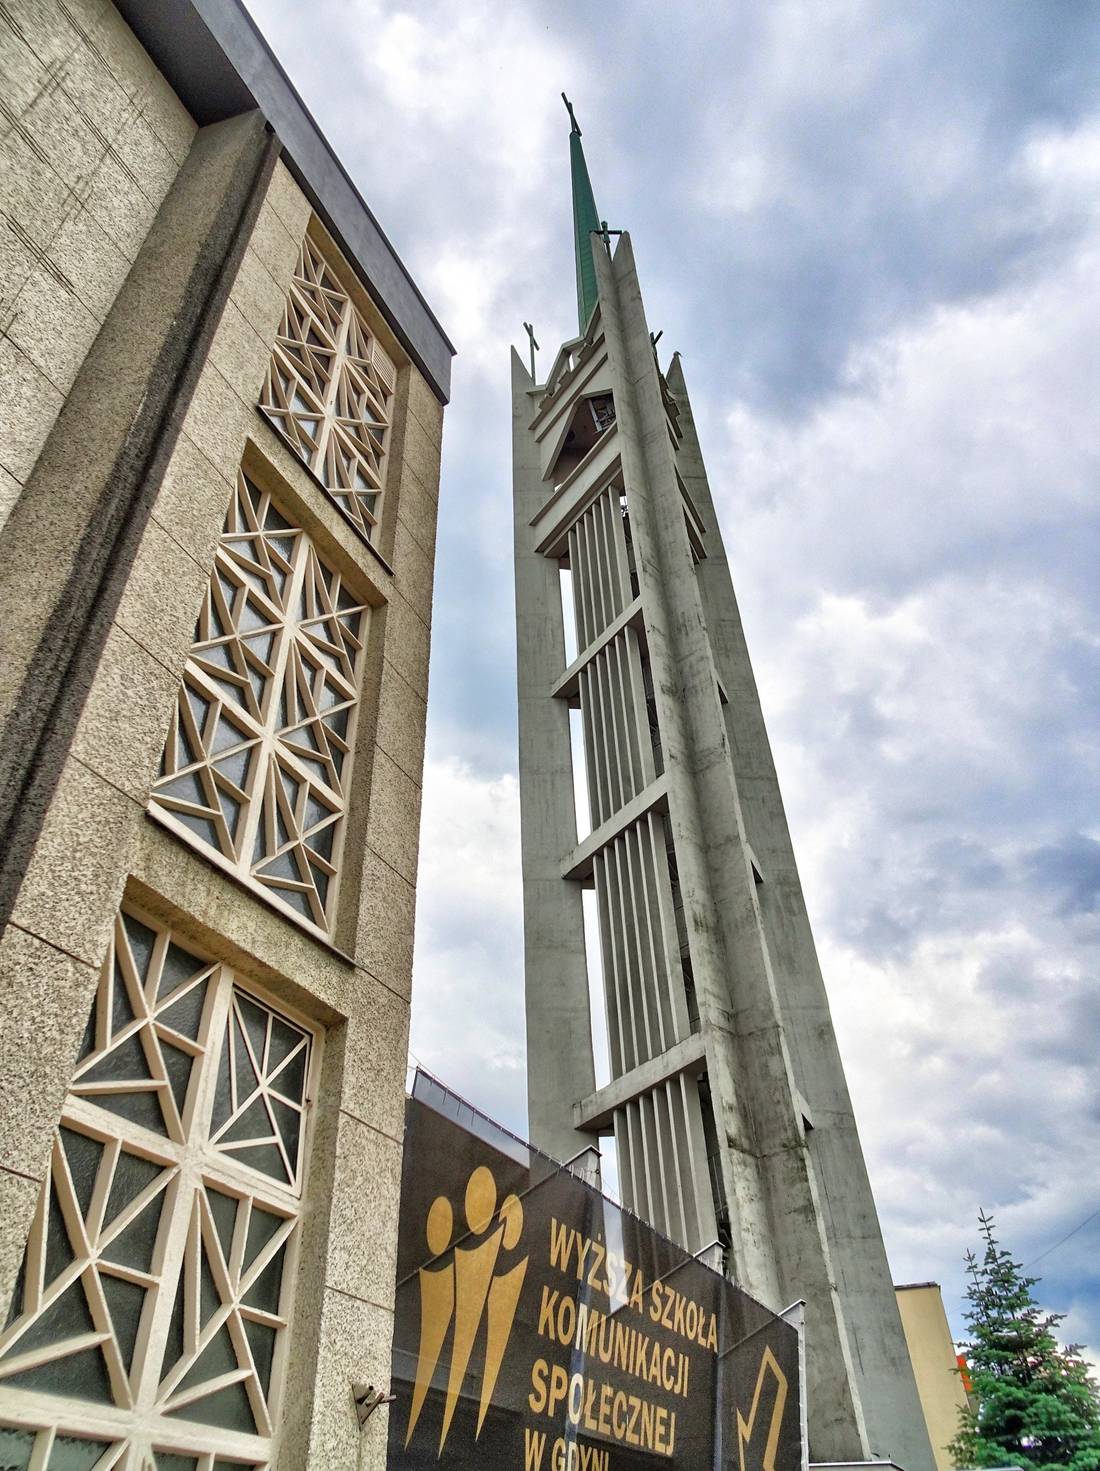 Catholic church, erected by communist workers